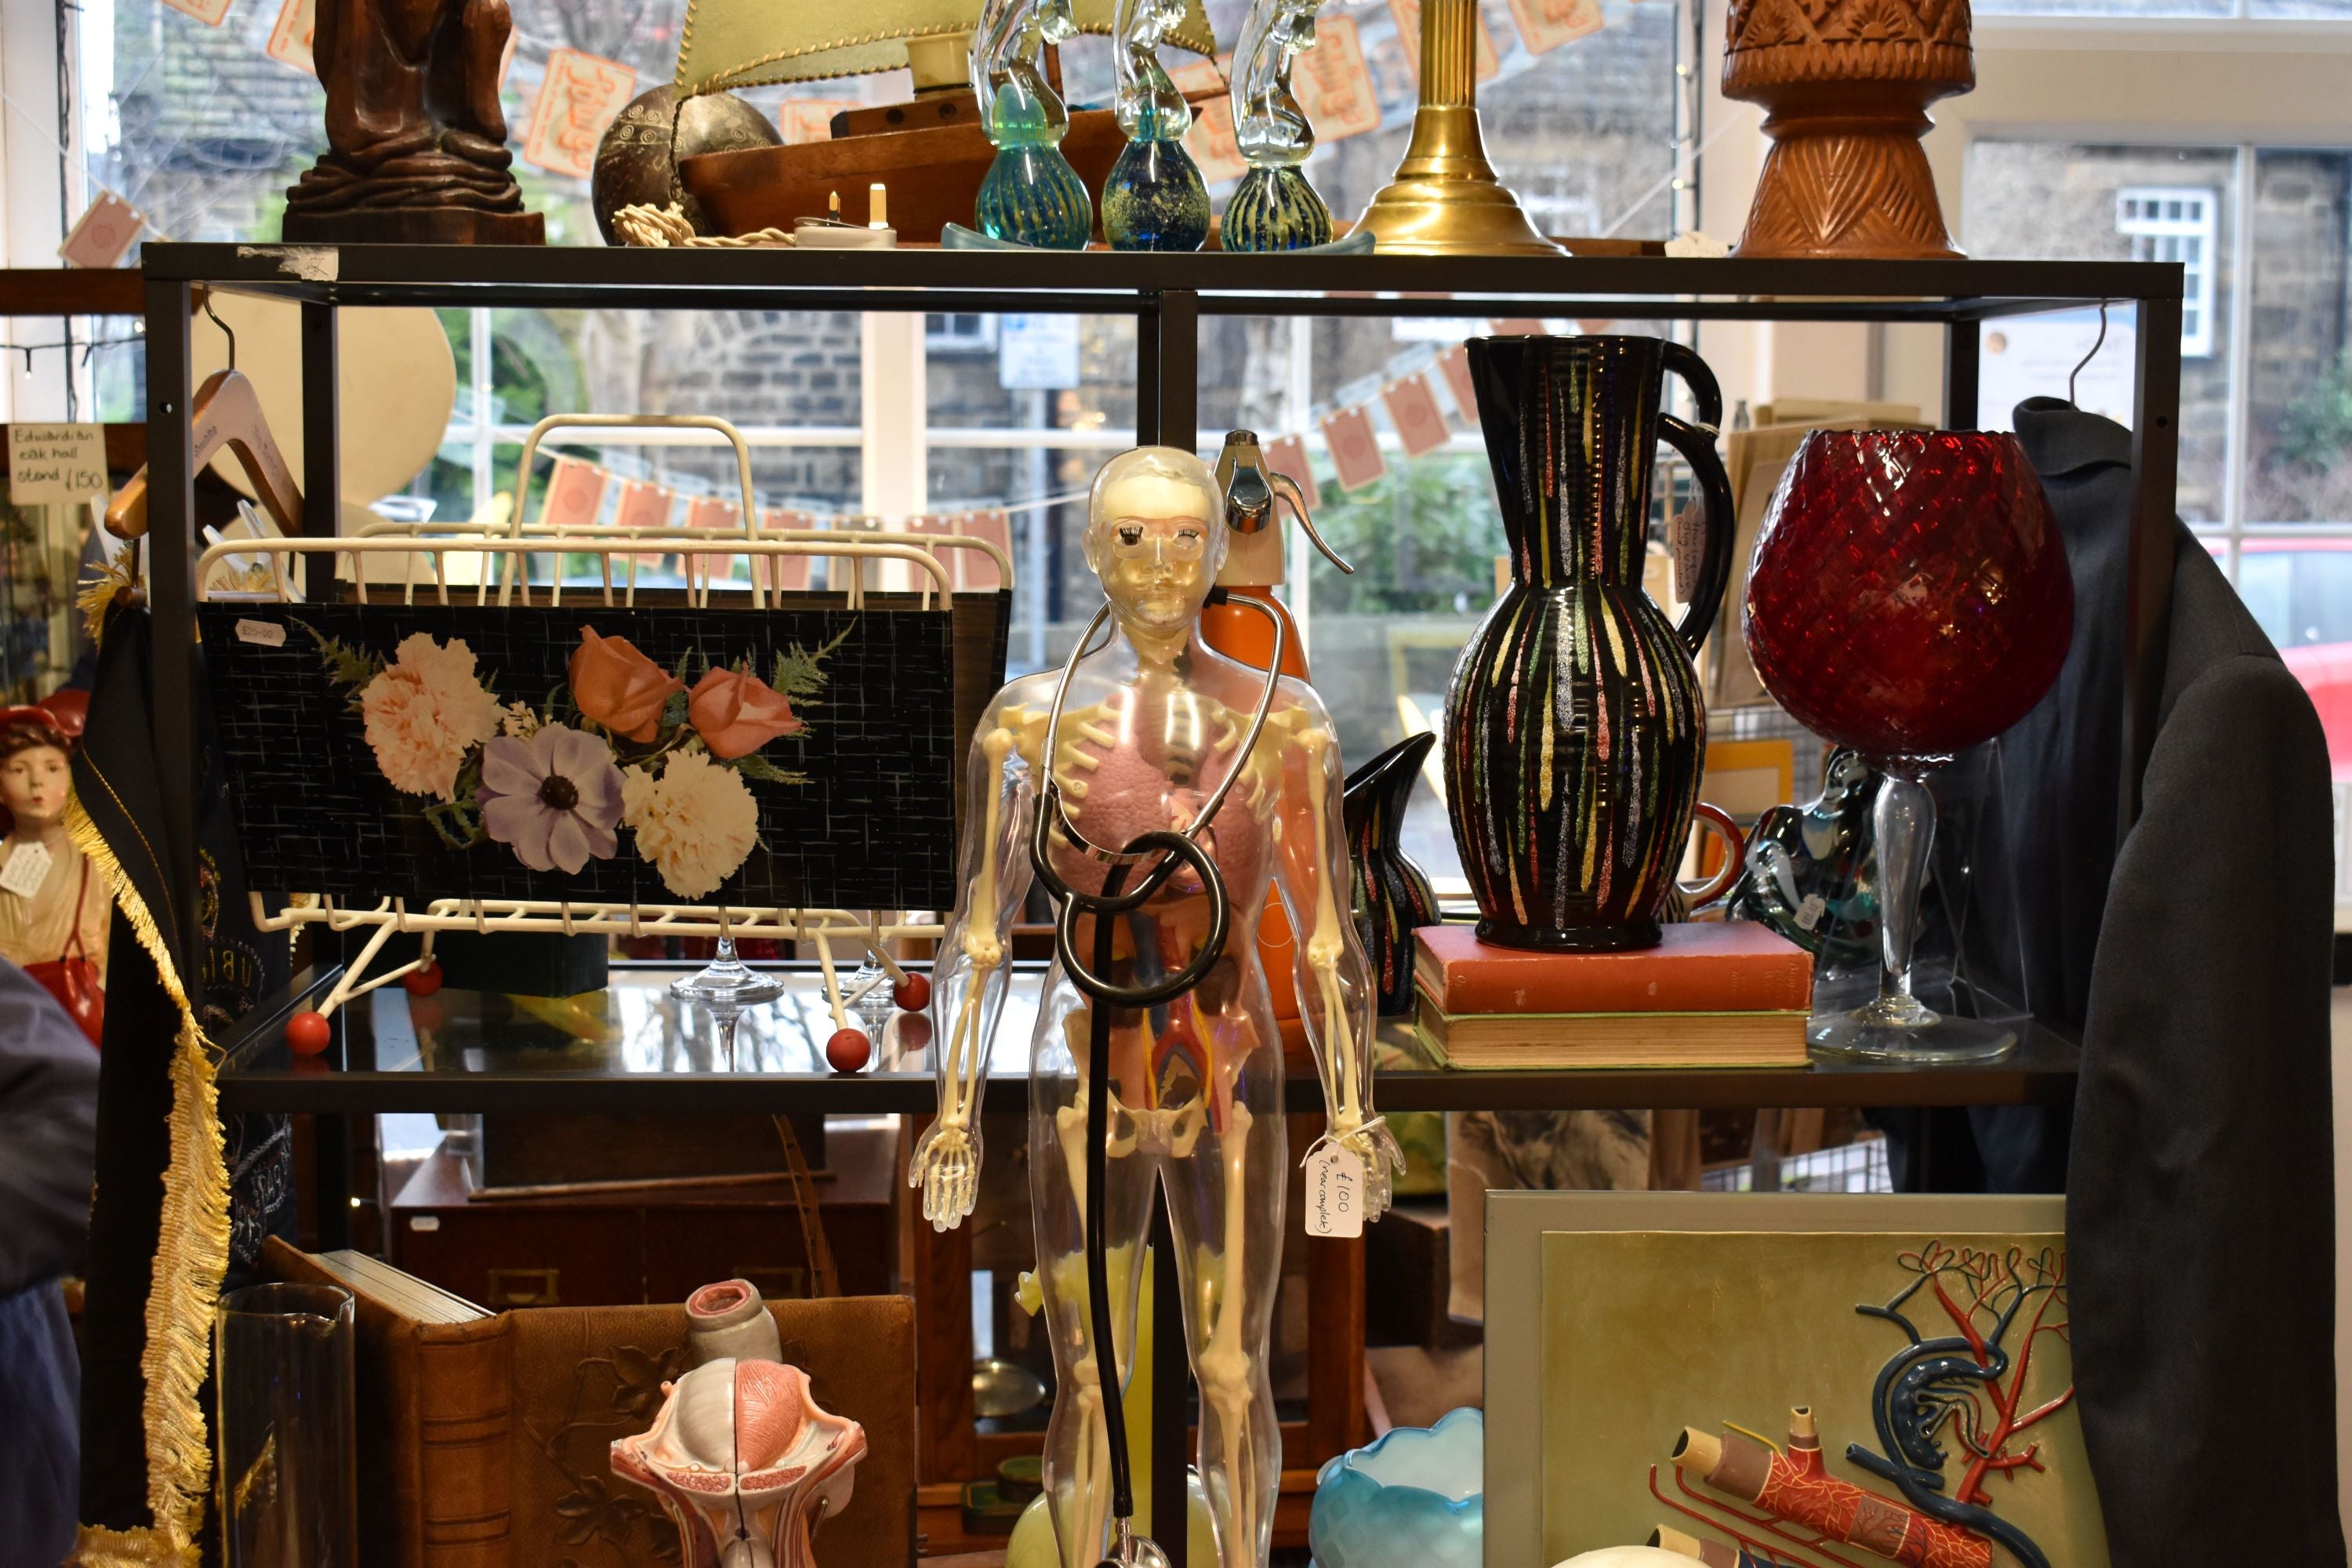 Image of a display with vintage anatomical models, ceramics and glassware.